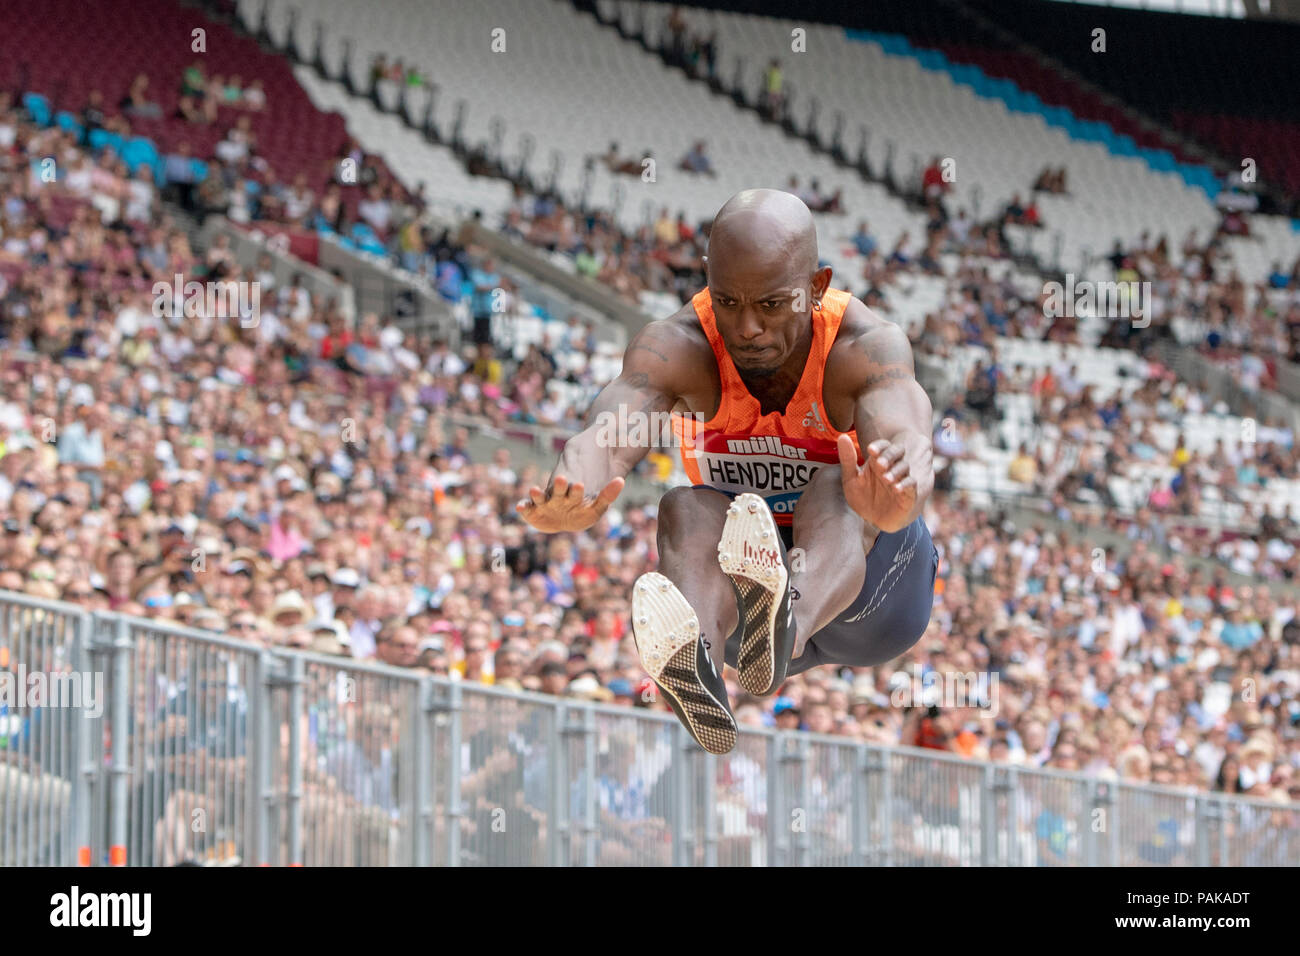 London, UK. 22nd July 2018. Olympic champion Jeff Henderson (USA) finished 5th (8.20m) in the long jump at the Muller Anniversary Games at the London Stadium, London, Great Britiain, on 22 July 2018. Credit: Andrew Peat/Alamy Live News Stock Photo